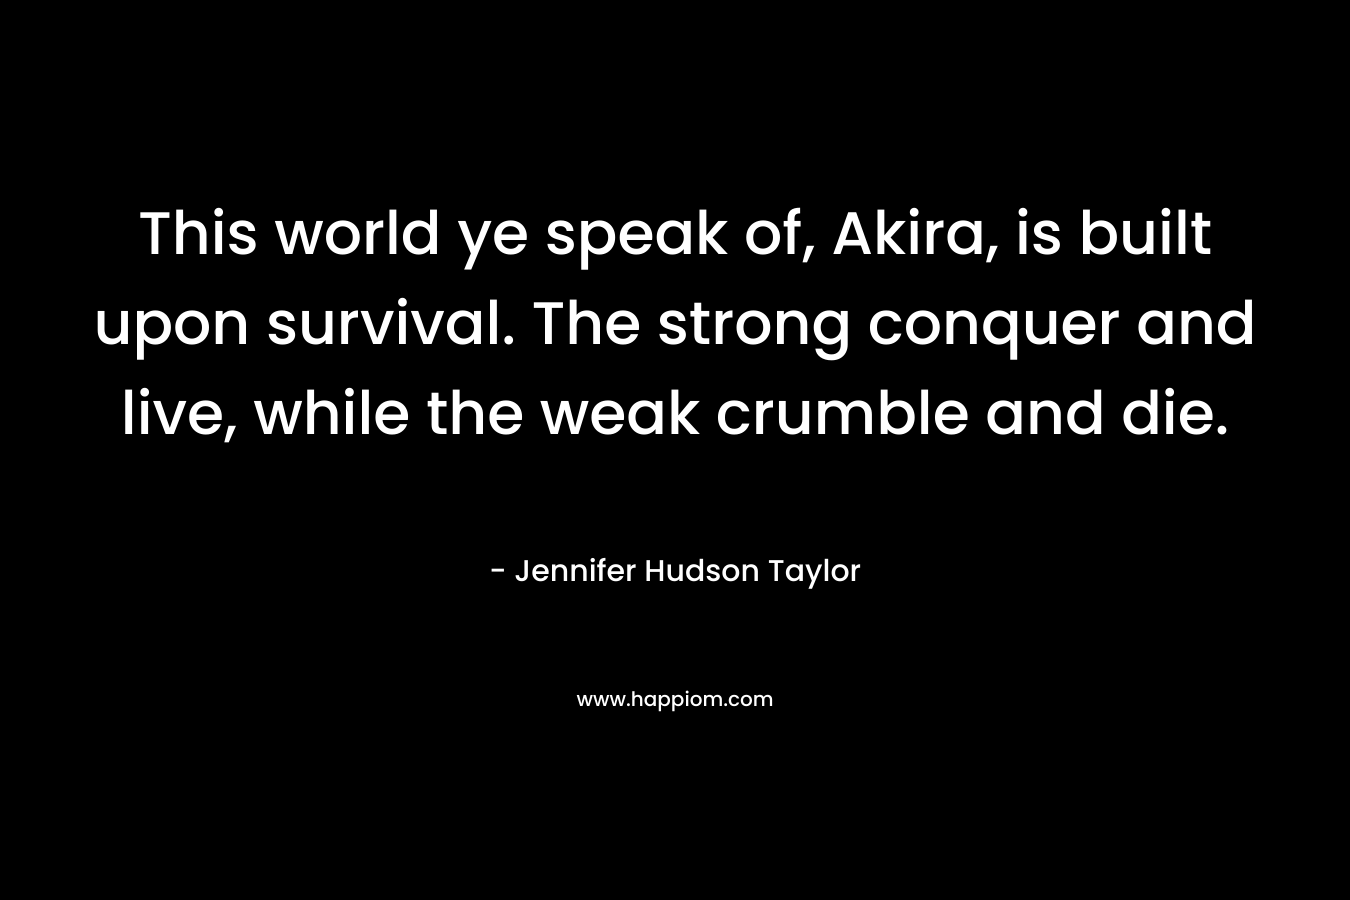 This world ye speak of, Akira, is built upon survival. The strong conquer and live, while the weak crumble and die. – Jennifer Hudson Taylor